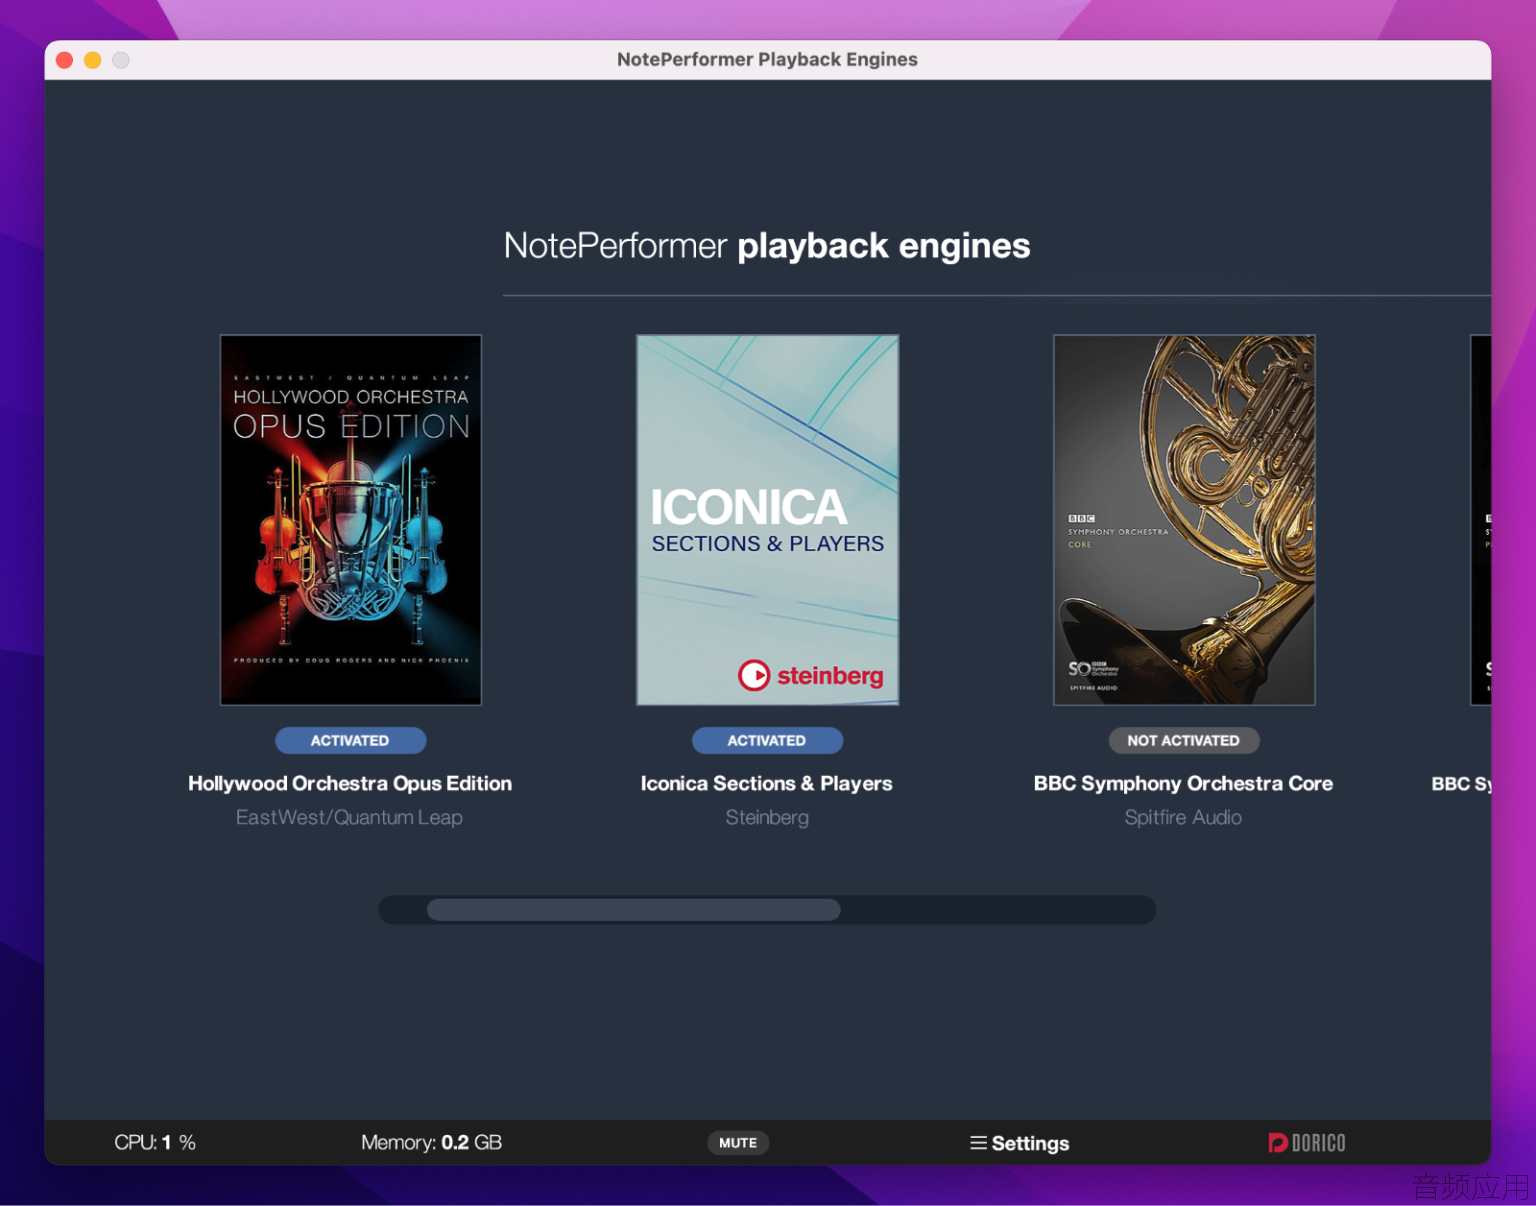 NotePerformer-Playback-Engines-start-screen-1536x1206.png